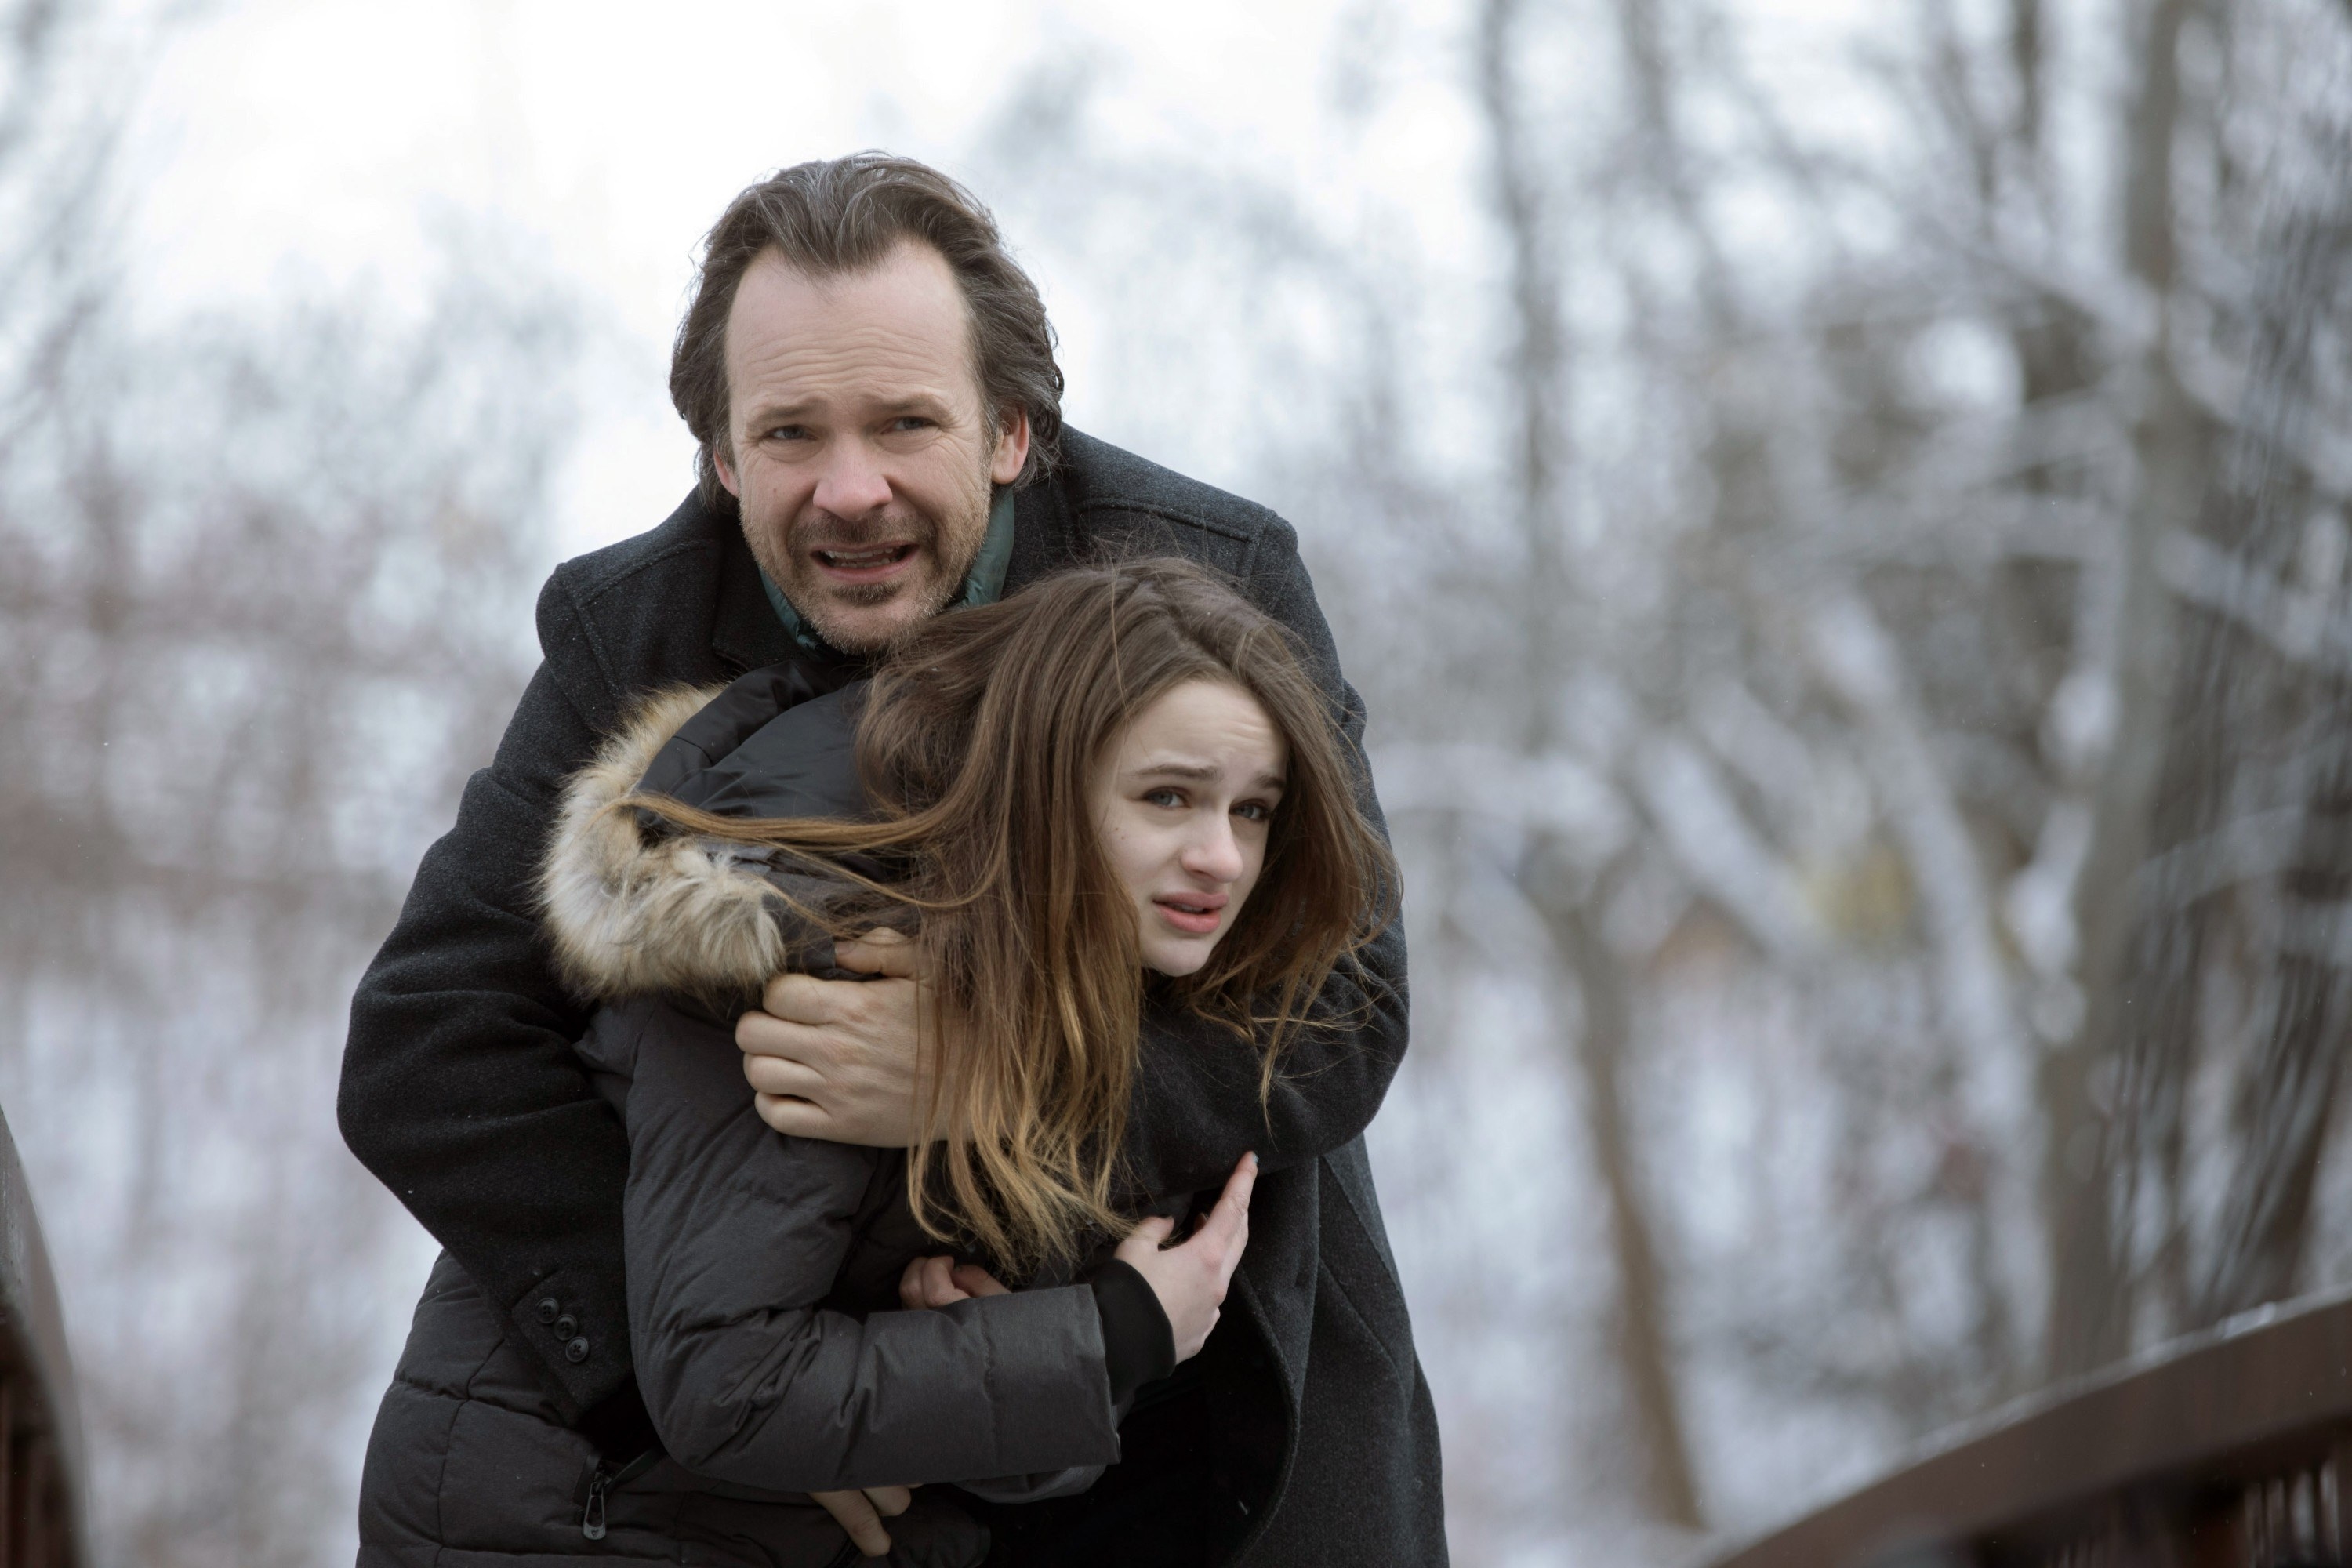 THE LIE, (aka WELCOME TO THE BLUMHOUSE: THE LIE), from top: Peter Sarsgaard, Joey King, 2020